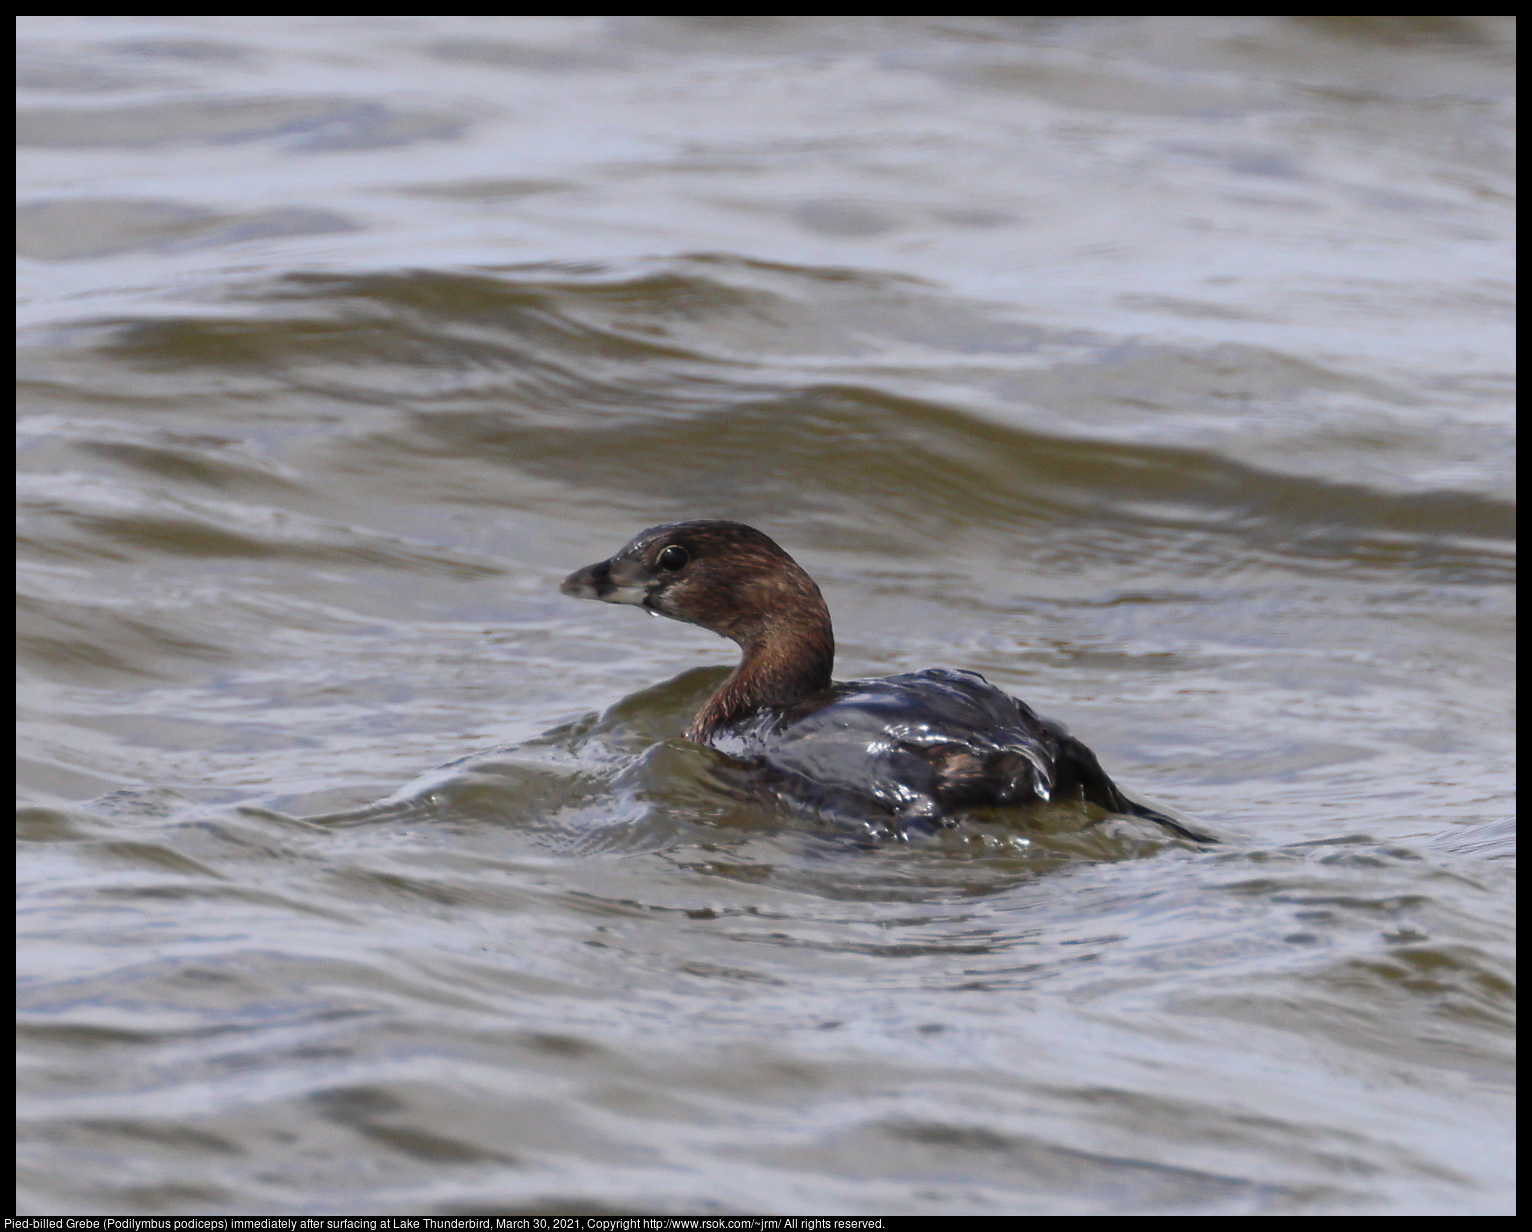 Pied-billed Grebe (Podilymbus podiceps) immediately after surfacing at Lake Thunderbird, March 30, 2021